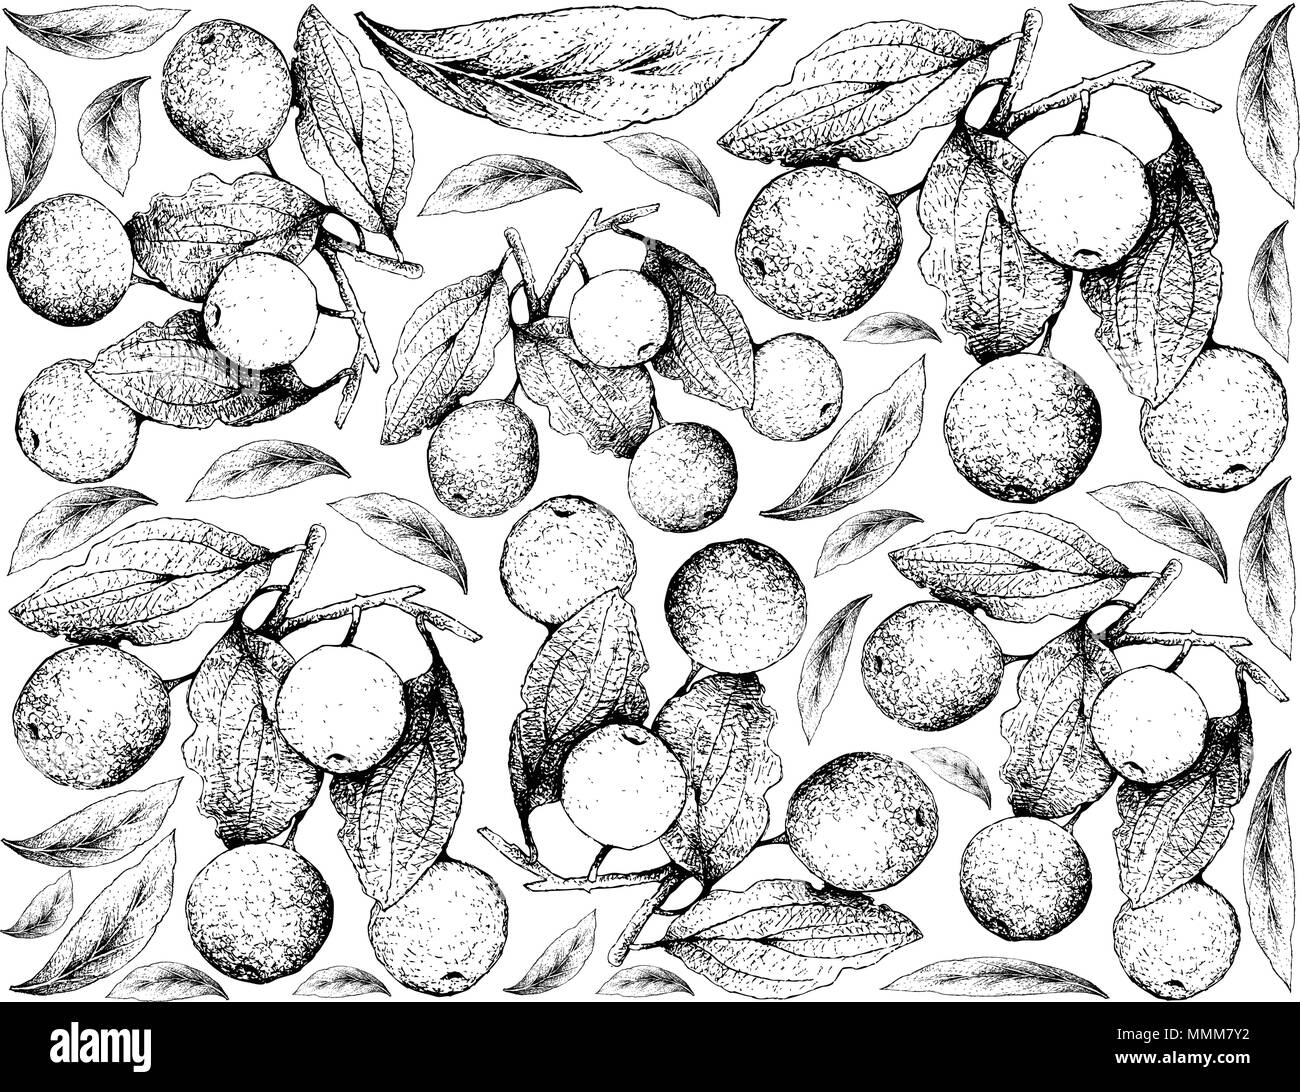 Tropical Fruit, Illustration Wallpaper of Hand Drawn Sketch Buffalo Thorn or Ziziphus Mucronata Fruits Isolated on White Background. High in Vitamin C Stock Vector